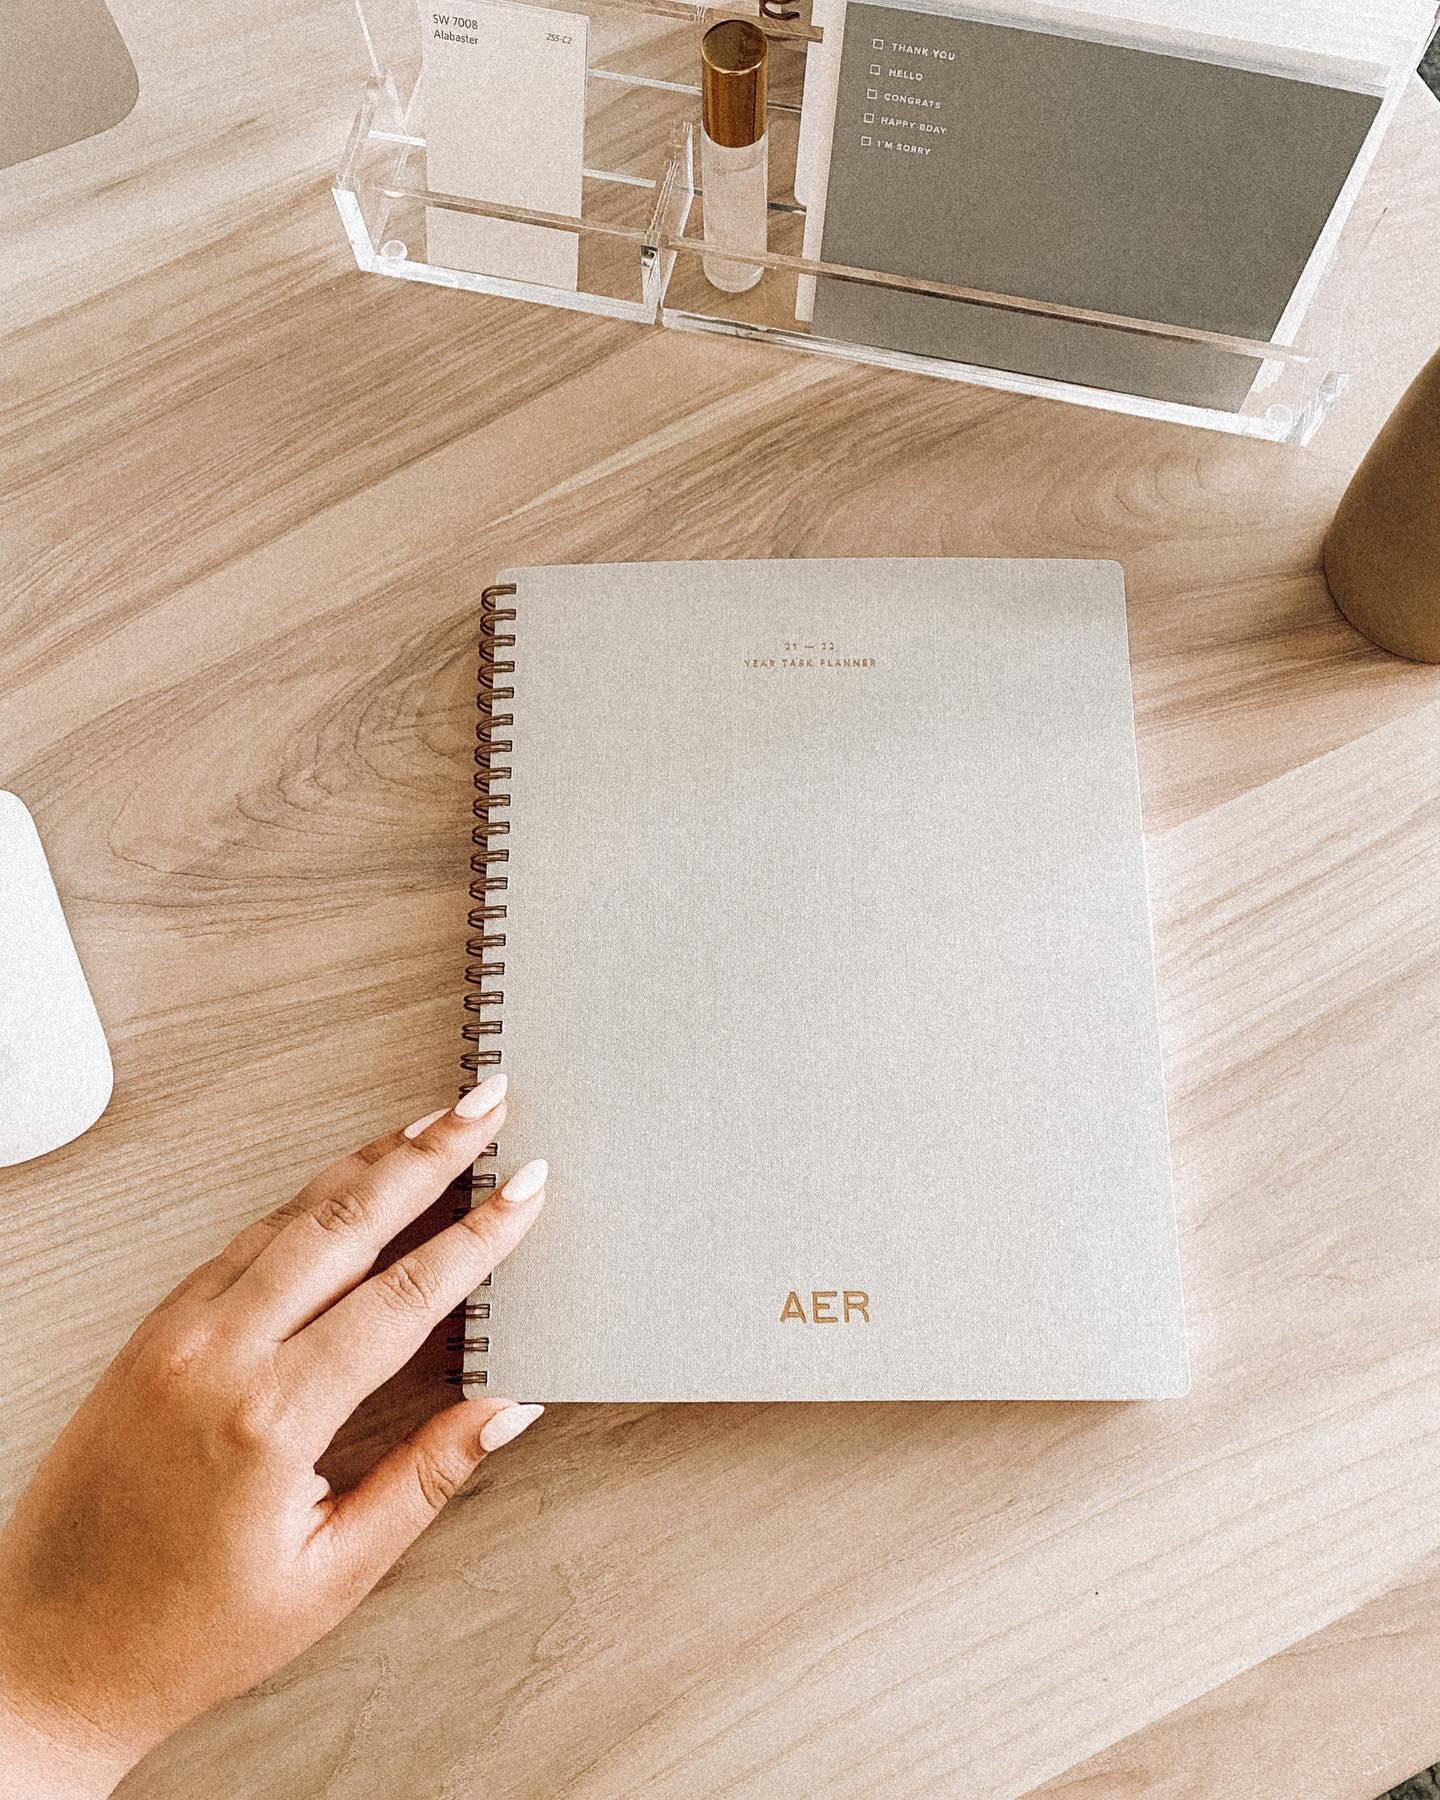 Ok look, I have been counting down and we are finally in single digits. 9 days until I can start using this beauty of a planner. August, get over here! 📝